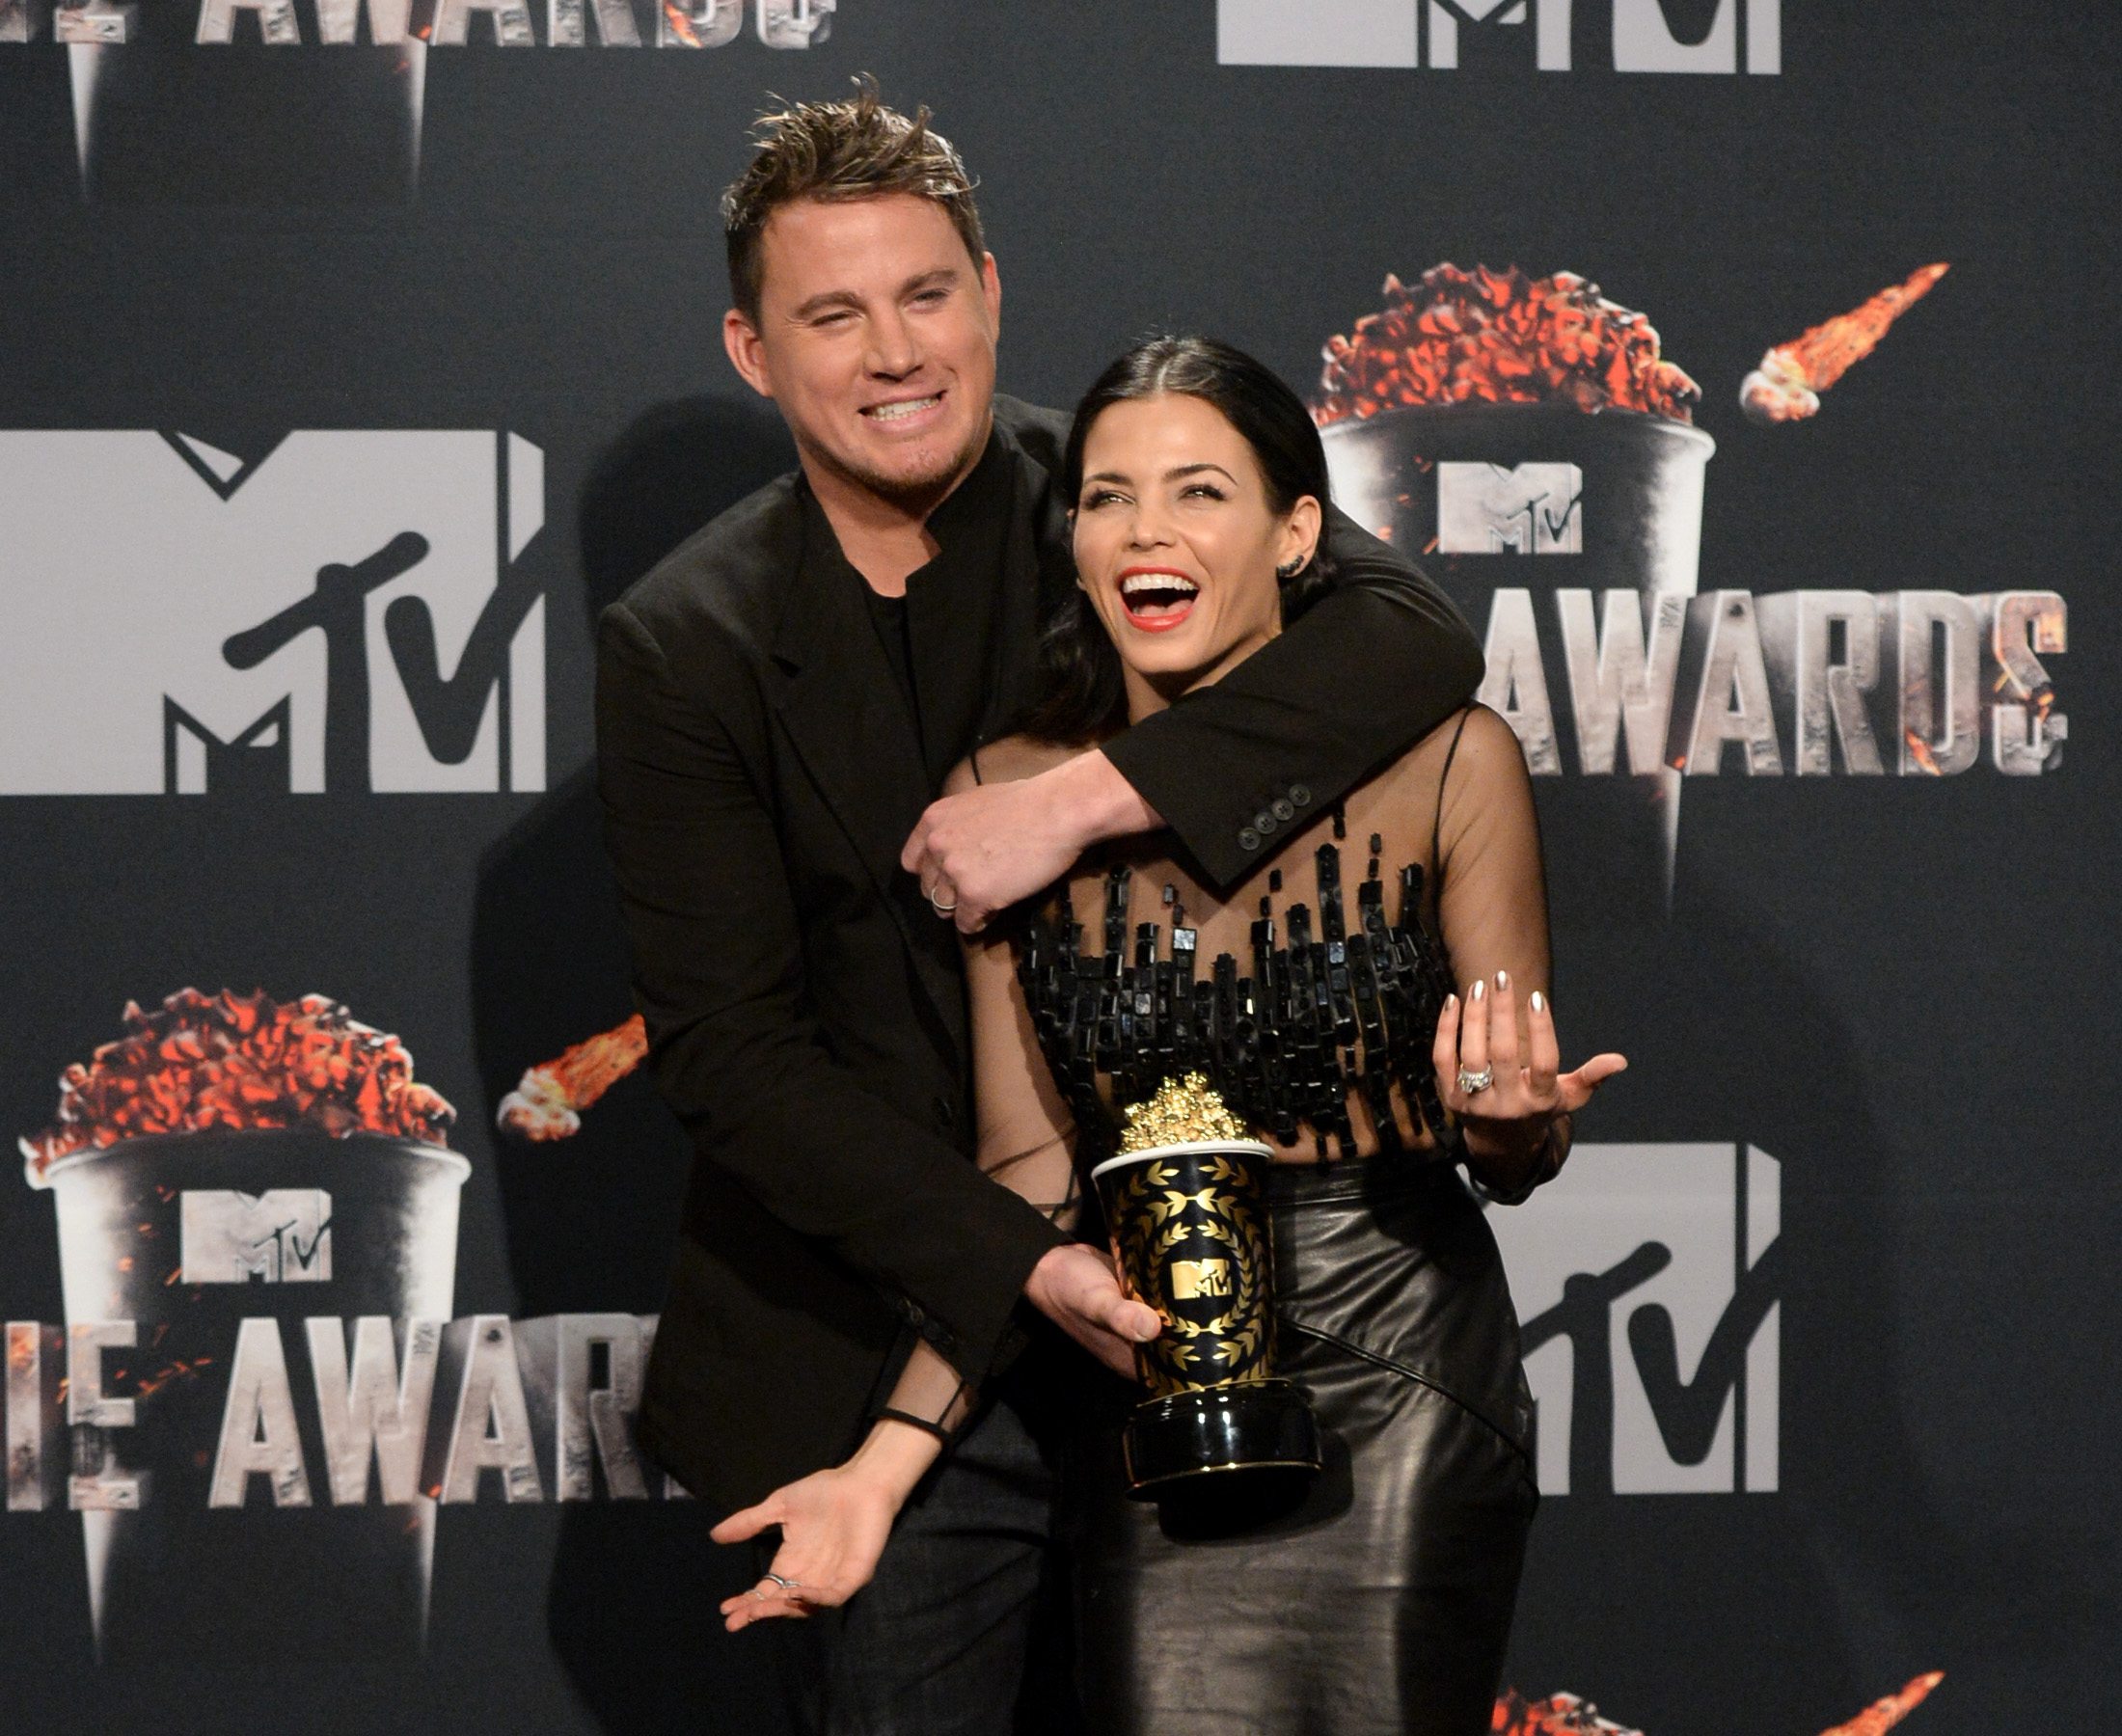 Honoree Channing Tatum (L, holding Trailblazer Award) and actress Jenna Dewan Tatum pose in the press room during the 2014 MTV Movie Awards at Nokia Theatre L.A. Live on April 13, 2014 in Los Angeles, California. 